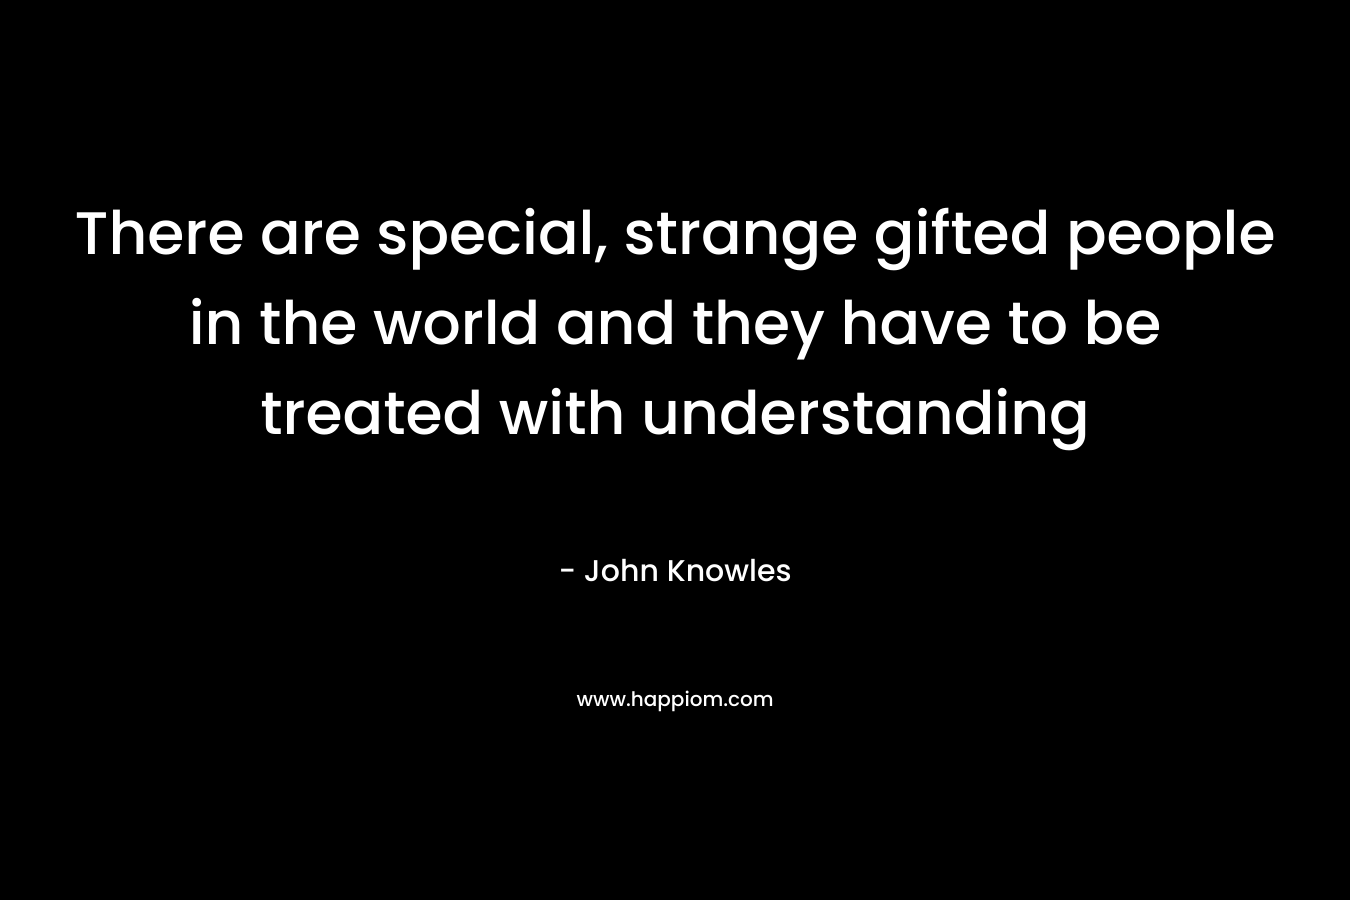 There are special, strange gifted people in the world and they have to be treated with understanding